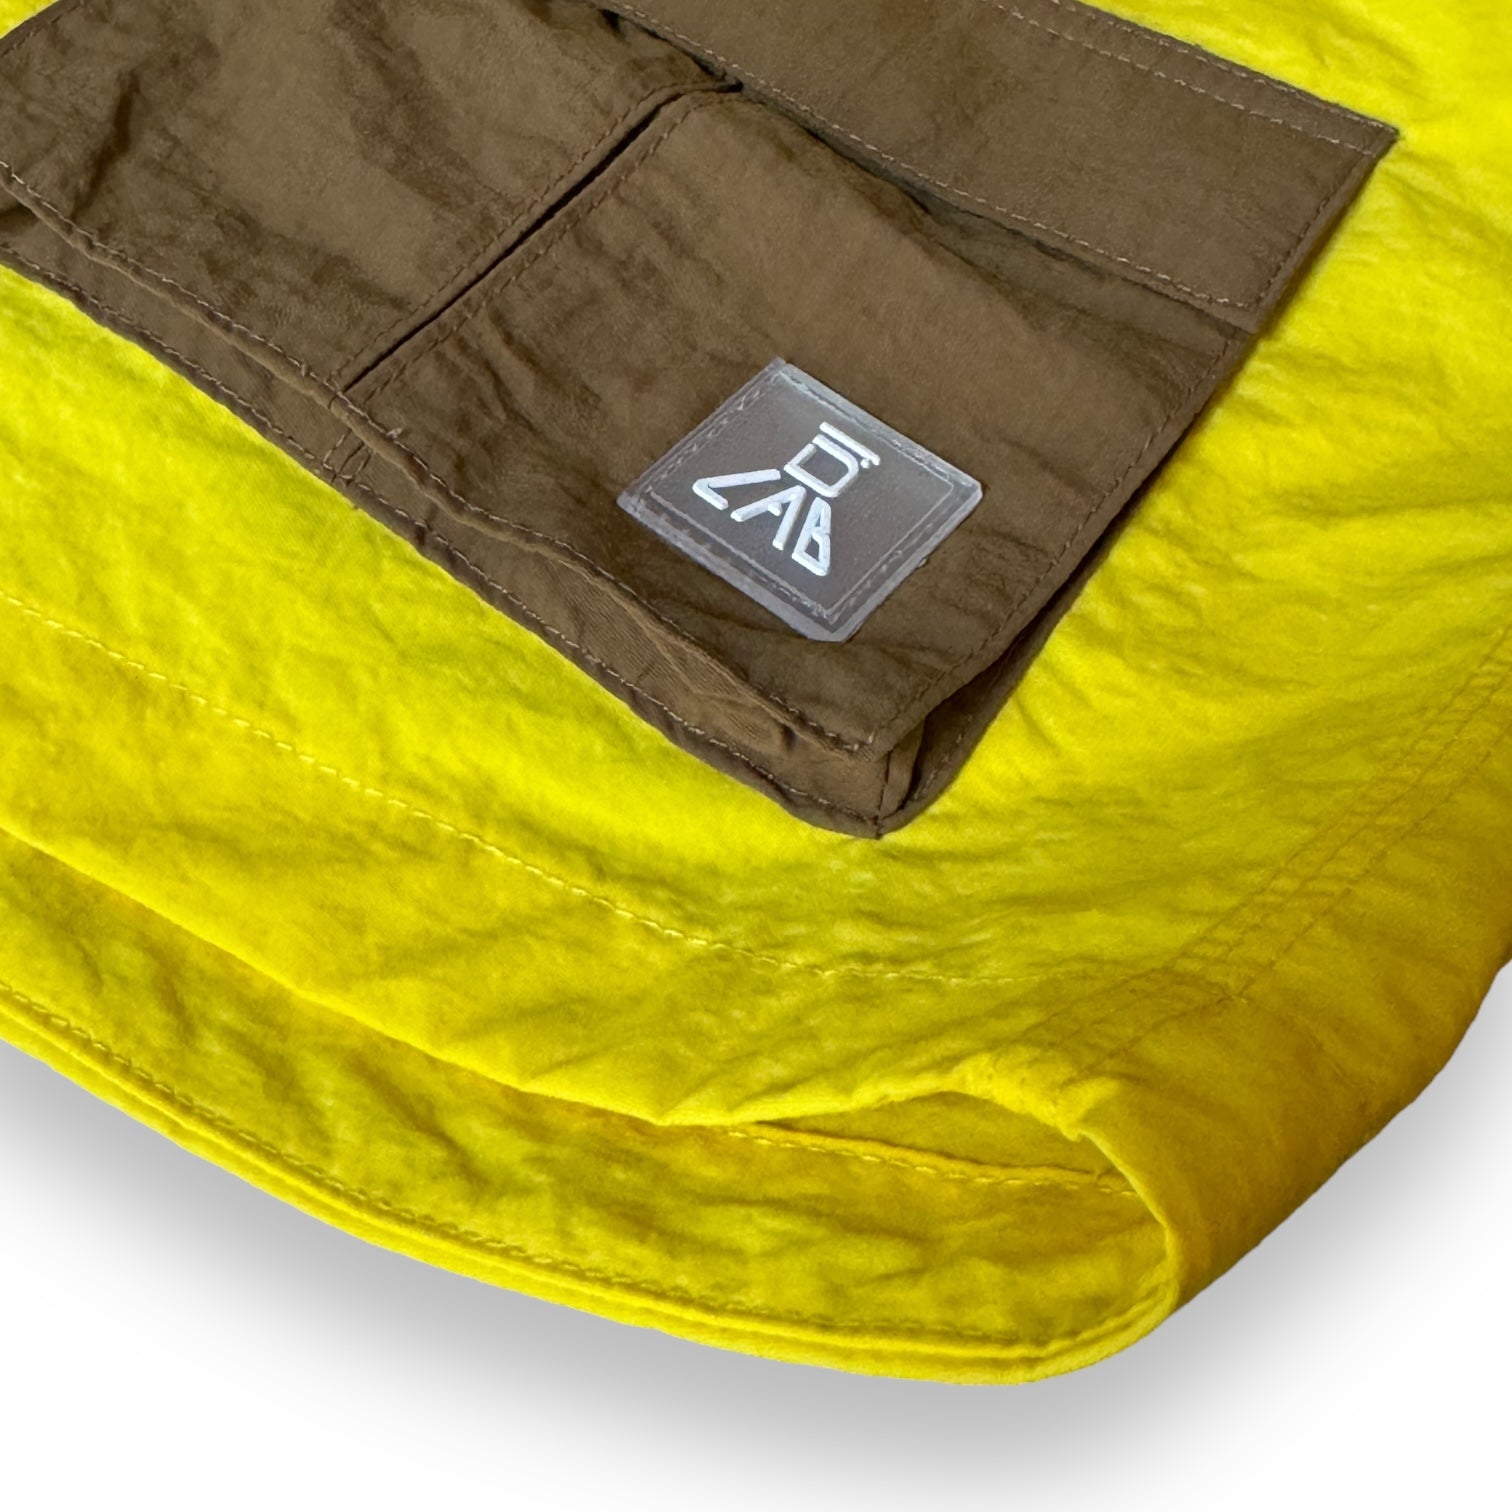 DLAB Hybrid Shorts Yellow with Brown Pocket